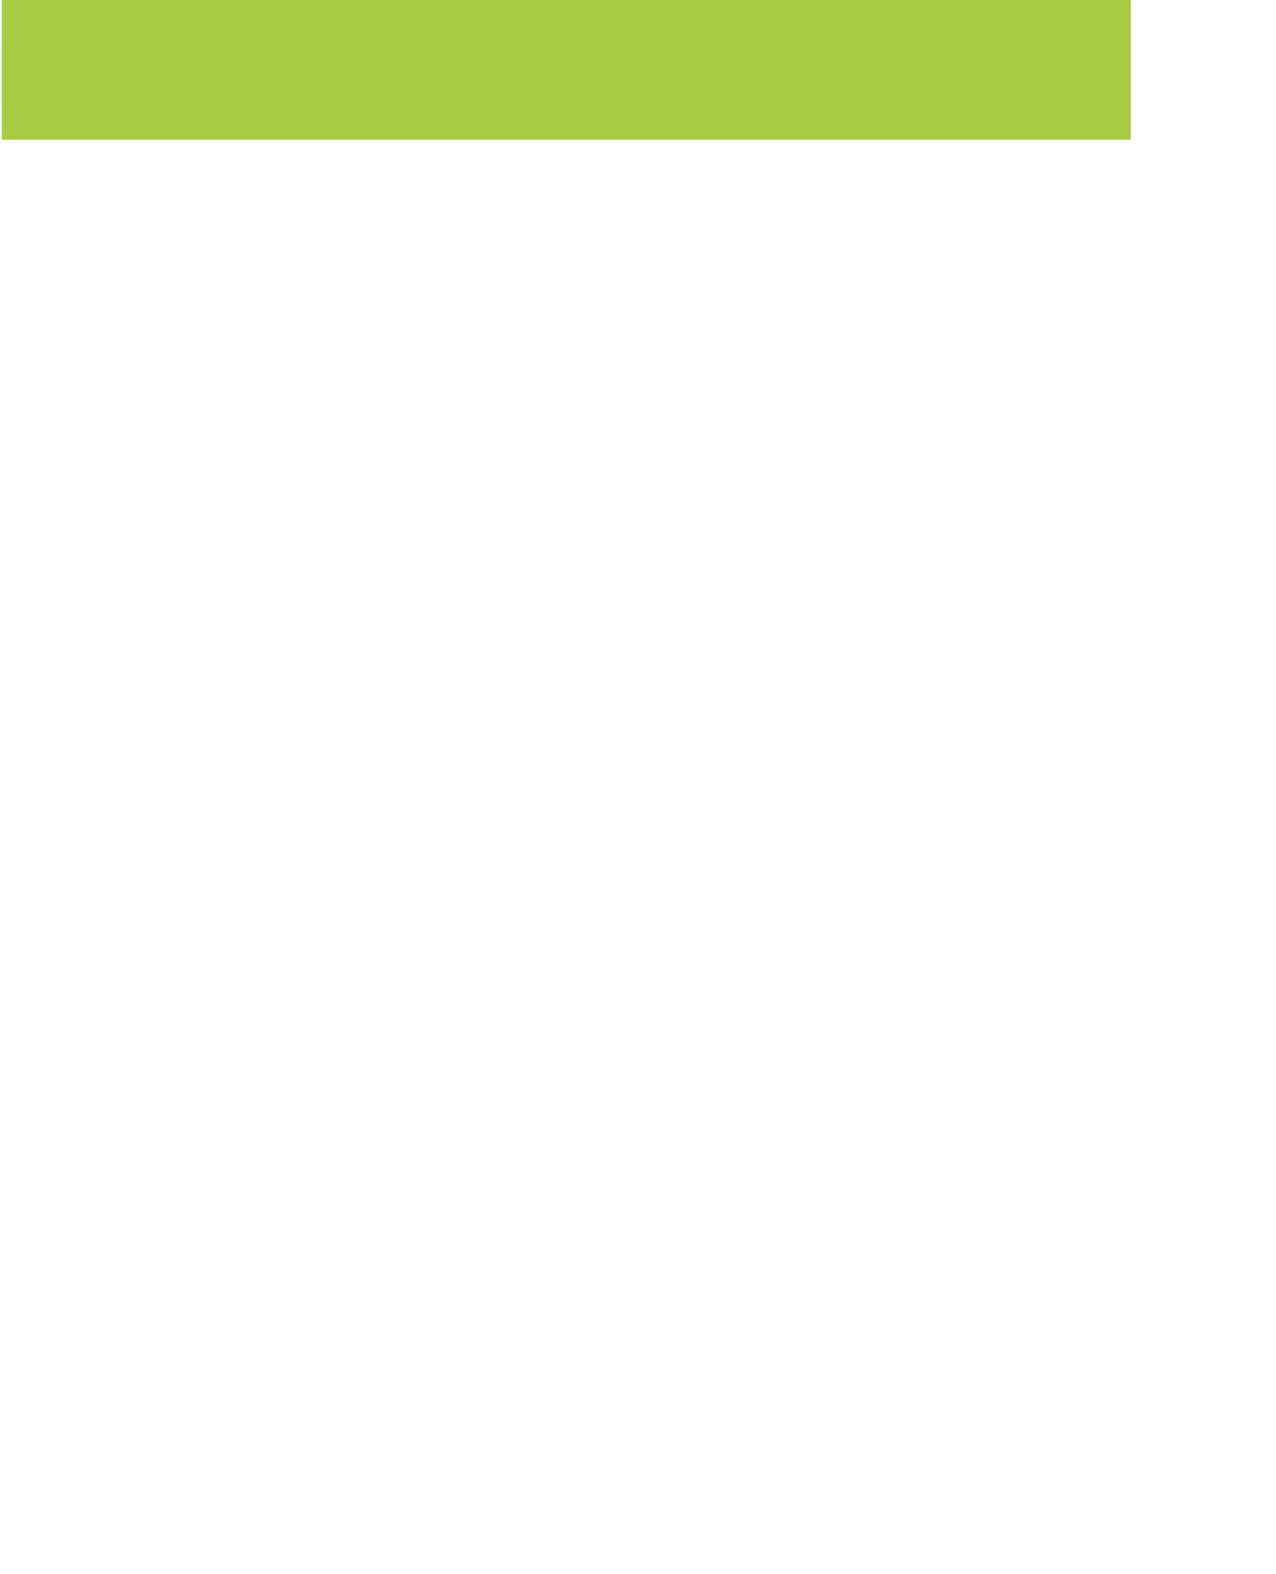 Inuvo logo for dark backgrounds (transparent PNG)